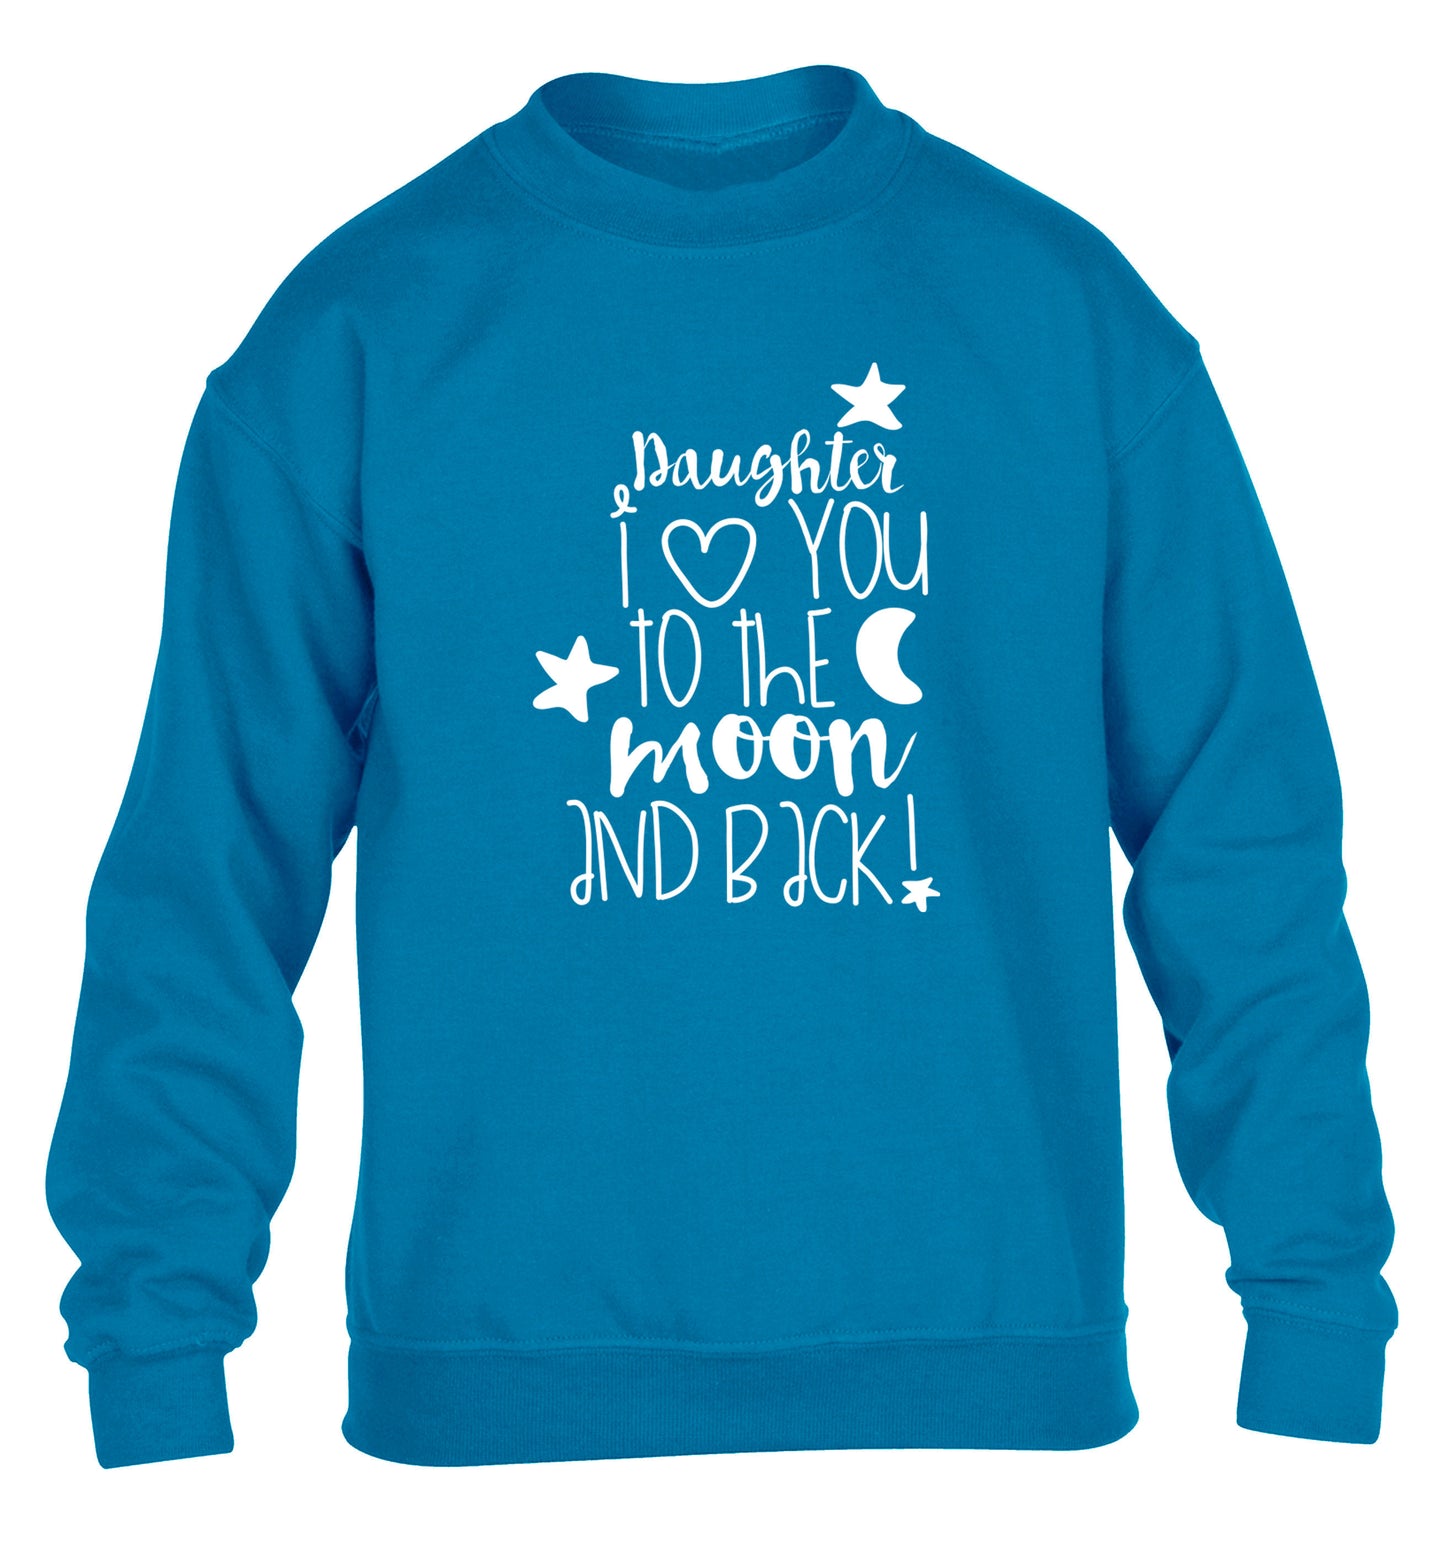 Daughter I love you to the moon and back children's blue  sweater 12-14 Years